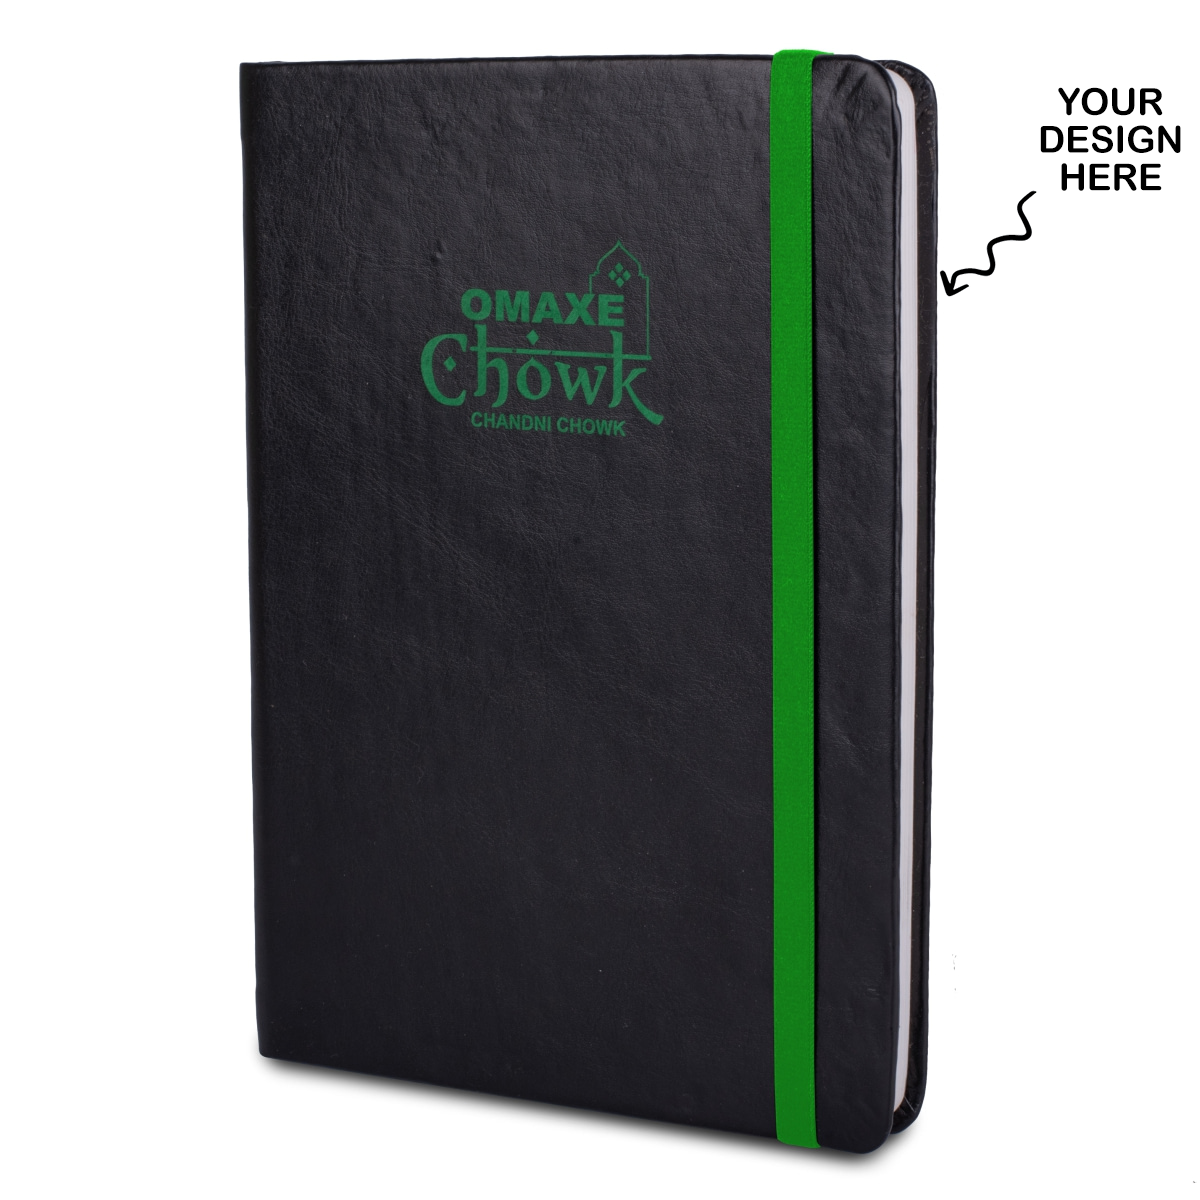 Personalized Color Engraved A5 Size Corporate Notebook Diary - For Office Use, Personal Use, or Corporate Gifting BGB122